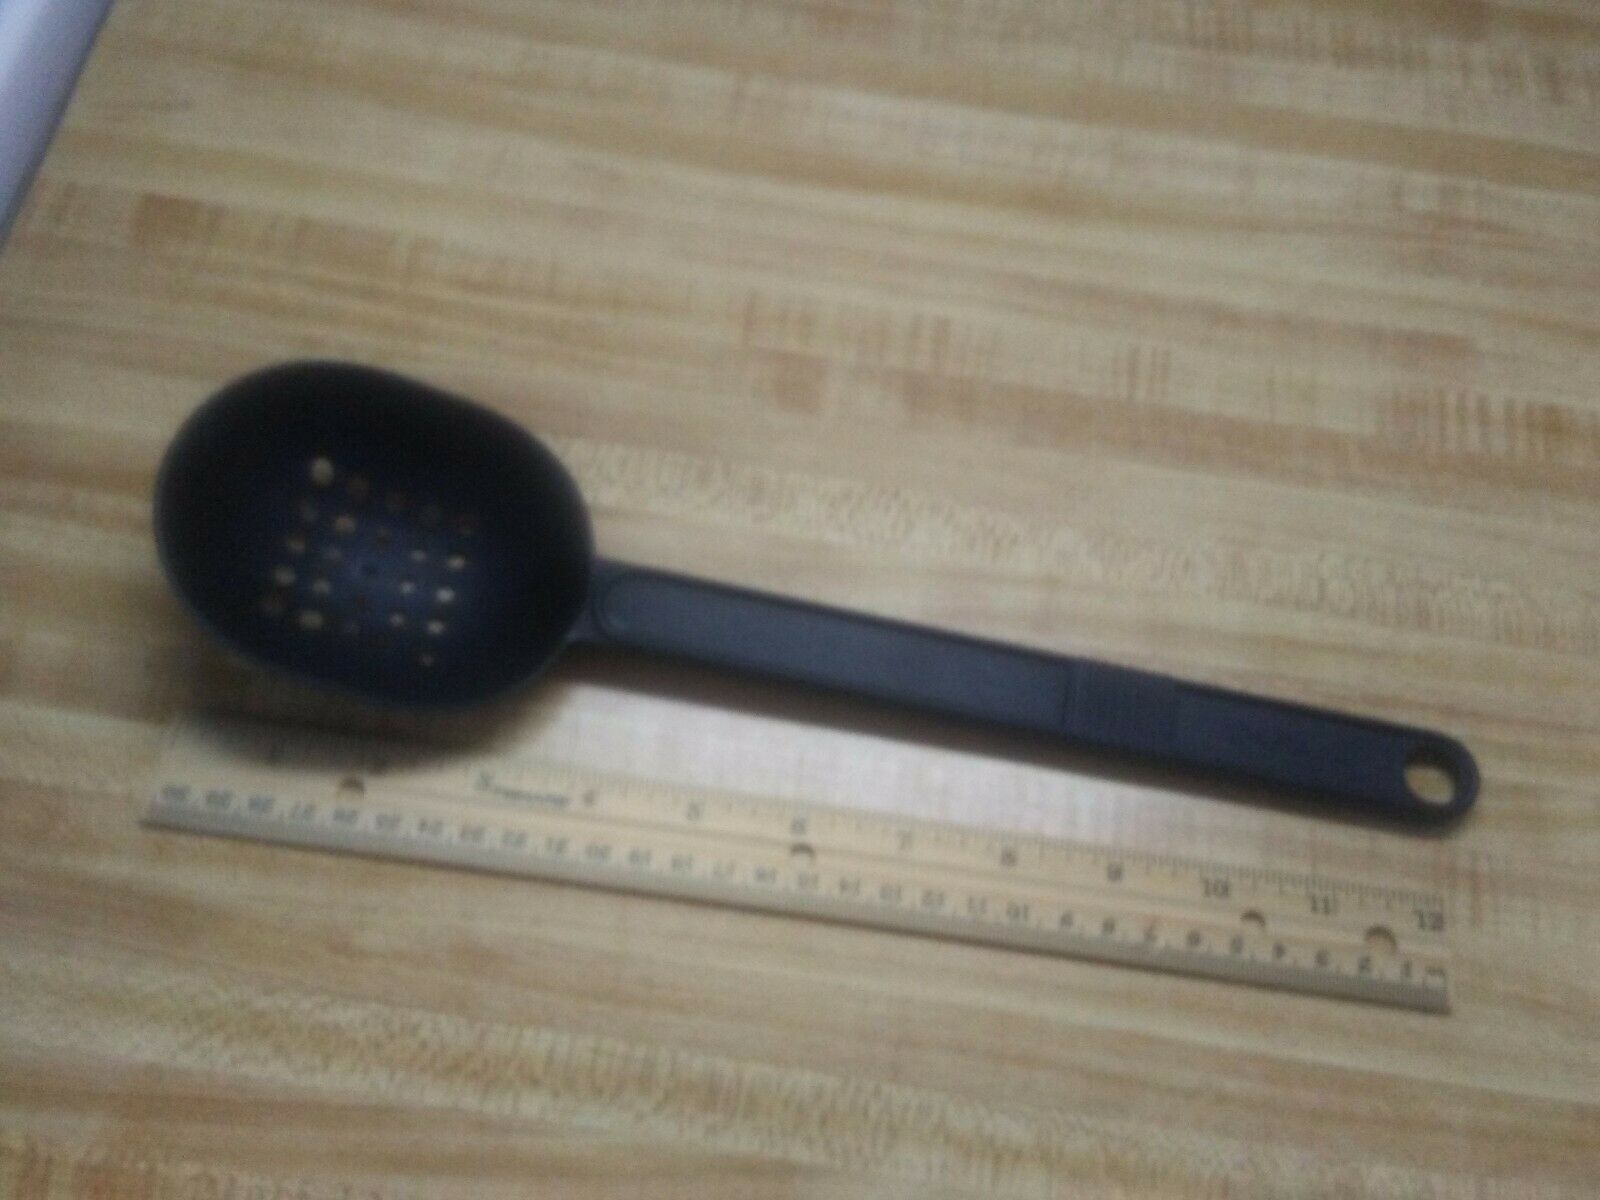 T-Fal strainer spoon - $18.99